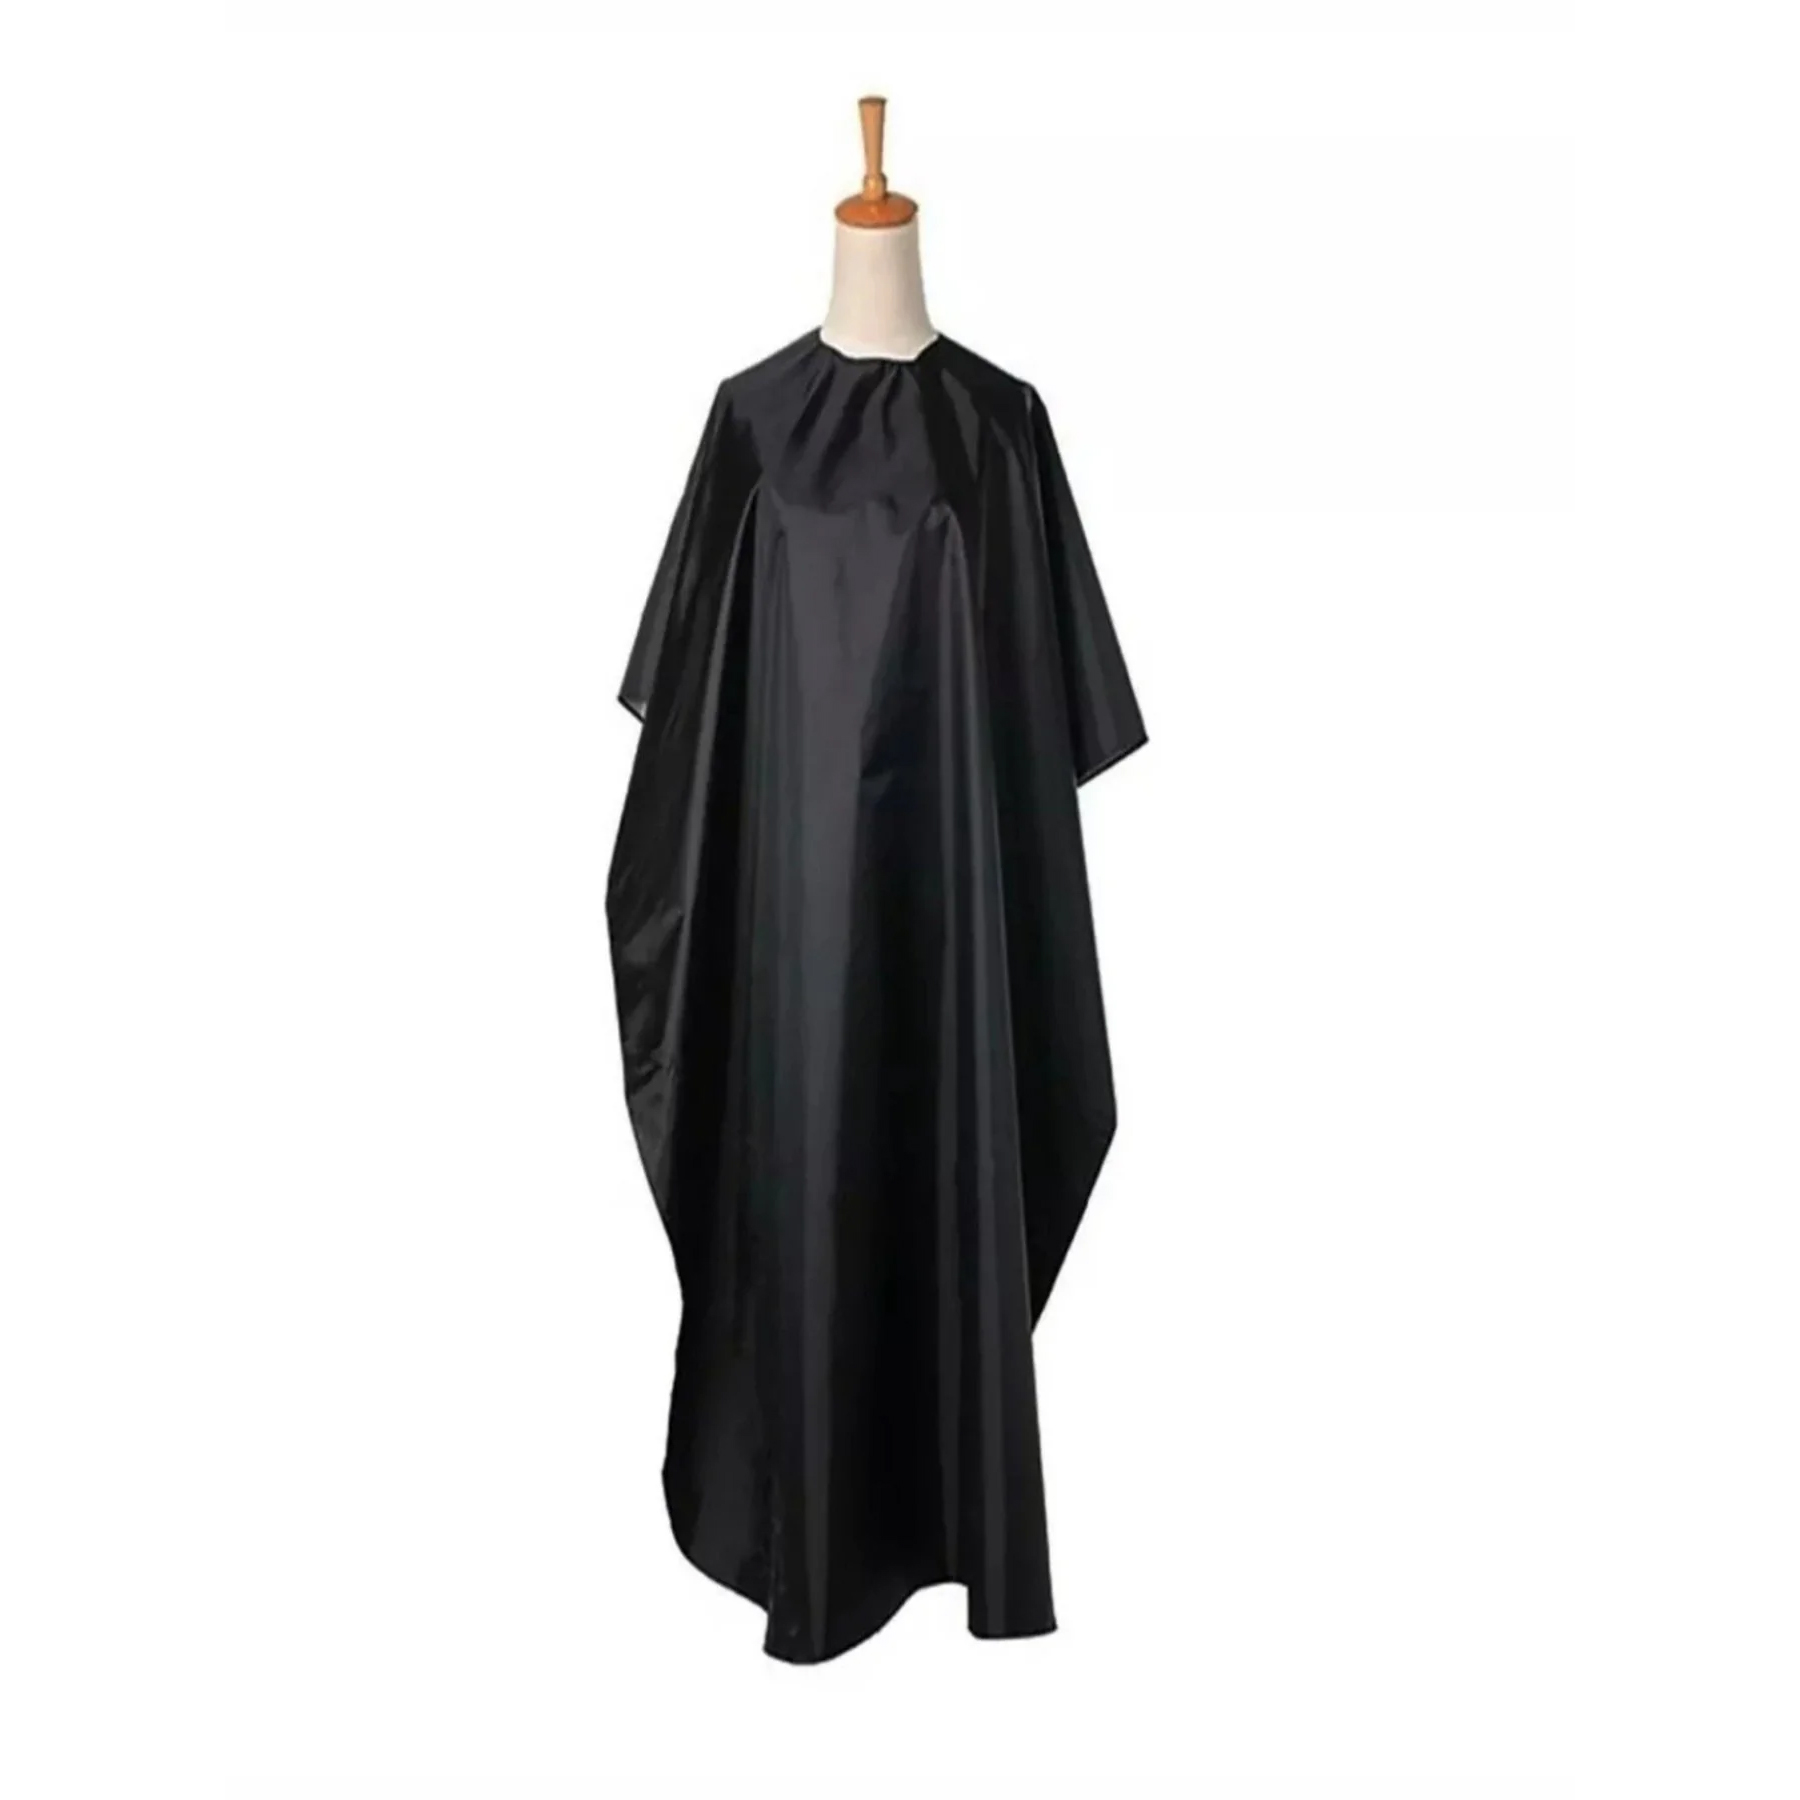 DUAL LOCK PROFESSIONAL BARBER HAIRDRESSING CAPE